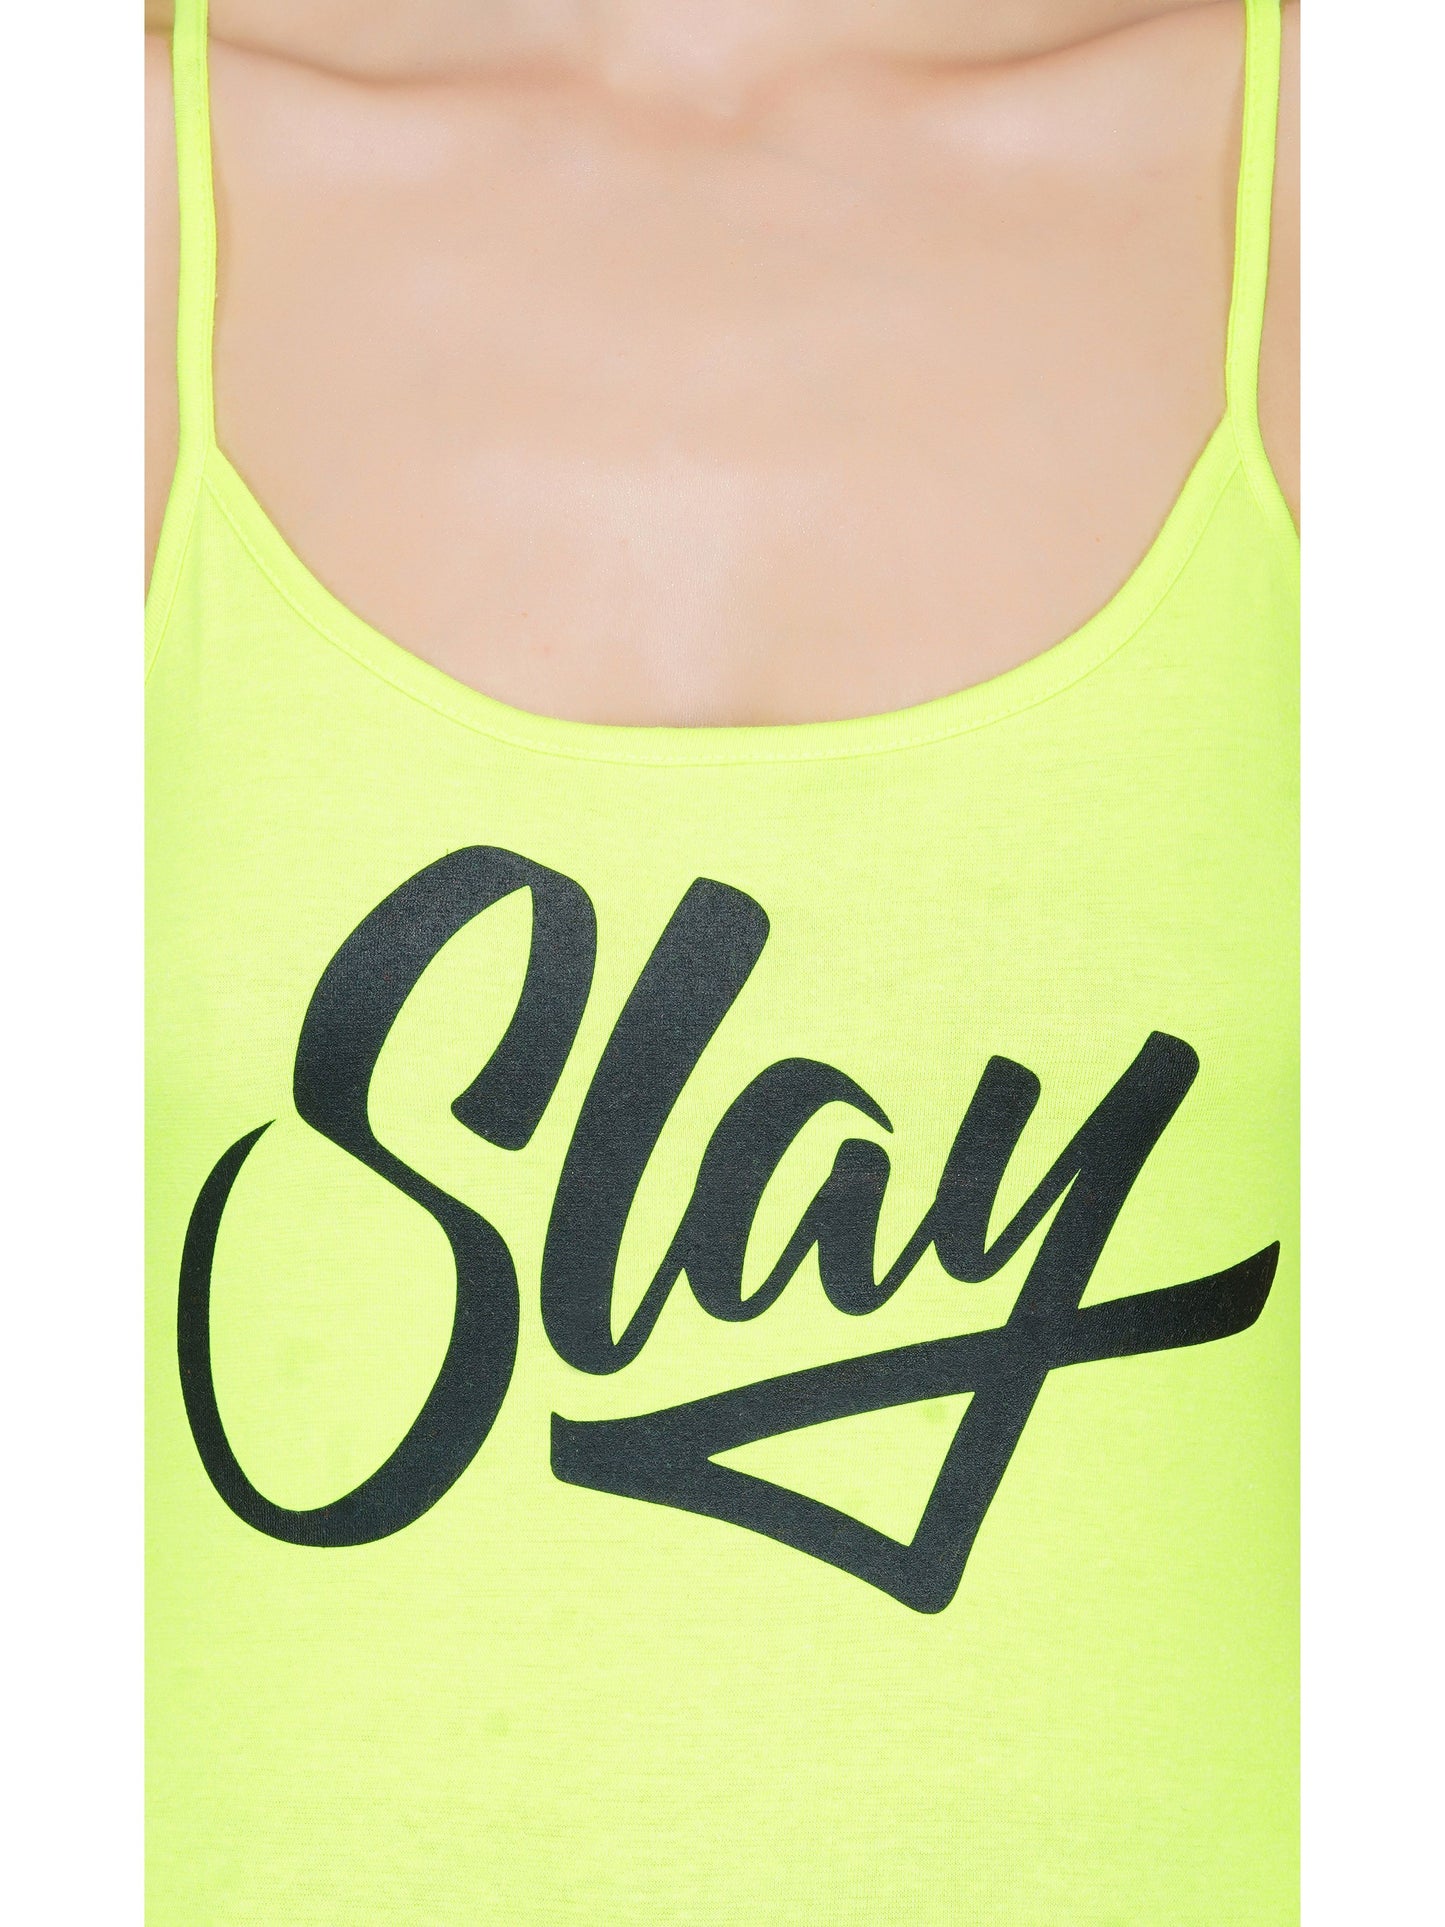 SLAY. Women's Neon Green Printed Camisole-clothing-to-slay.myshopify.com-Camisole Top